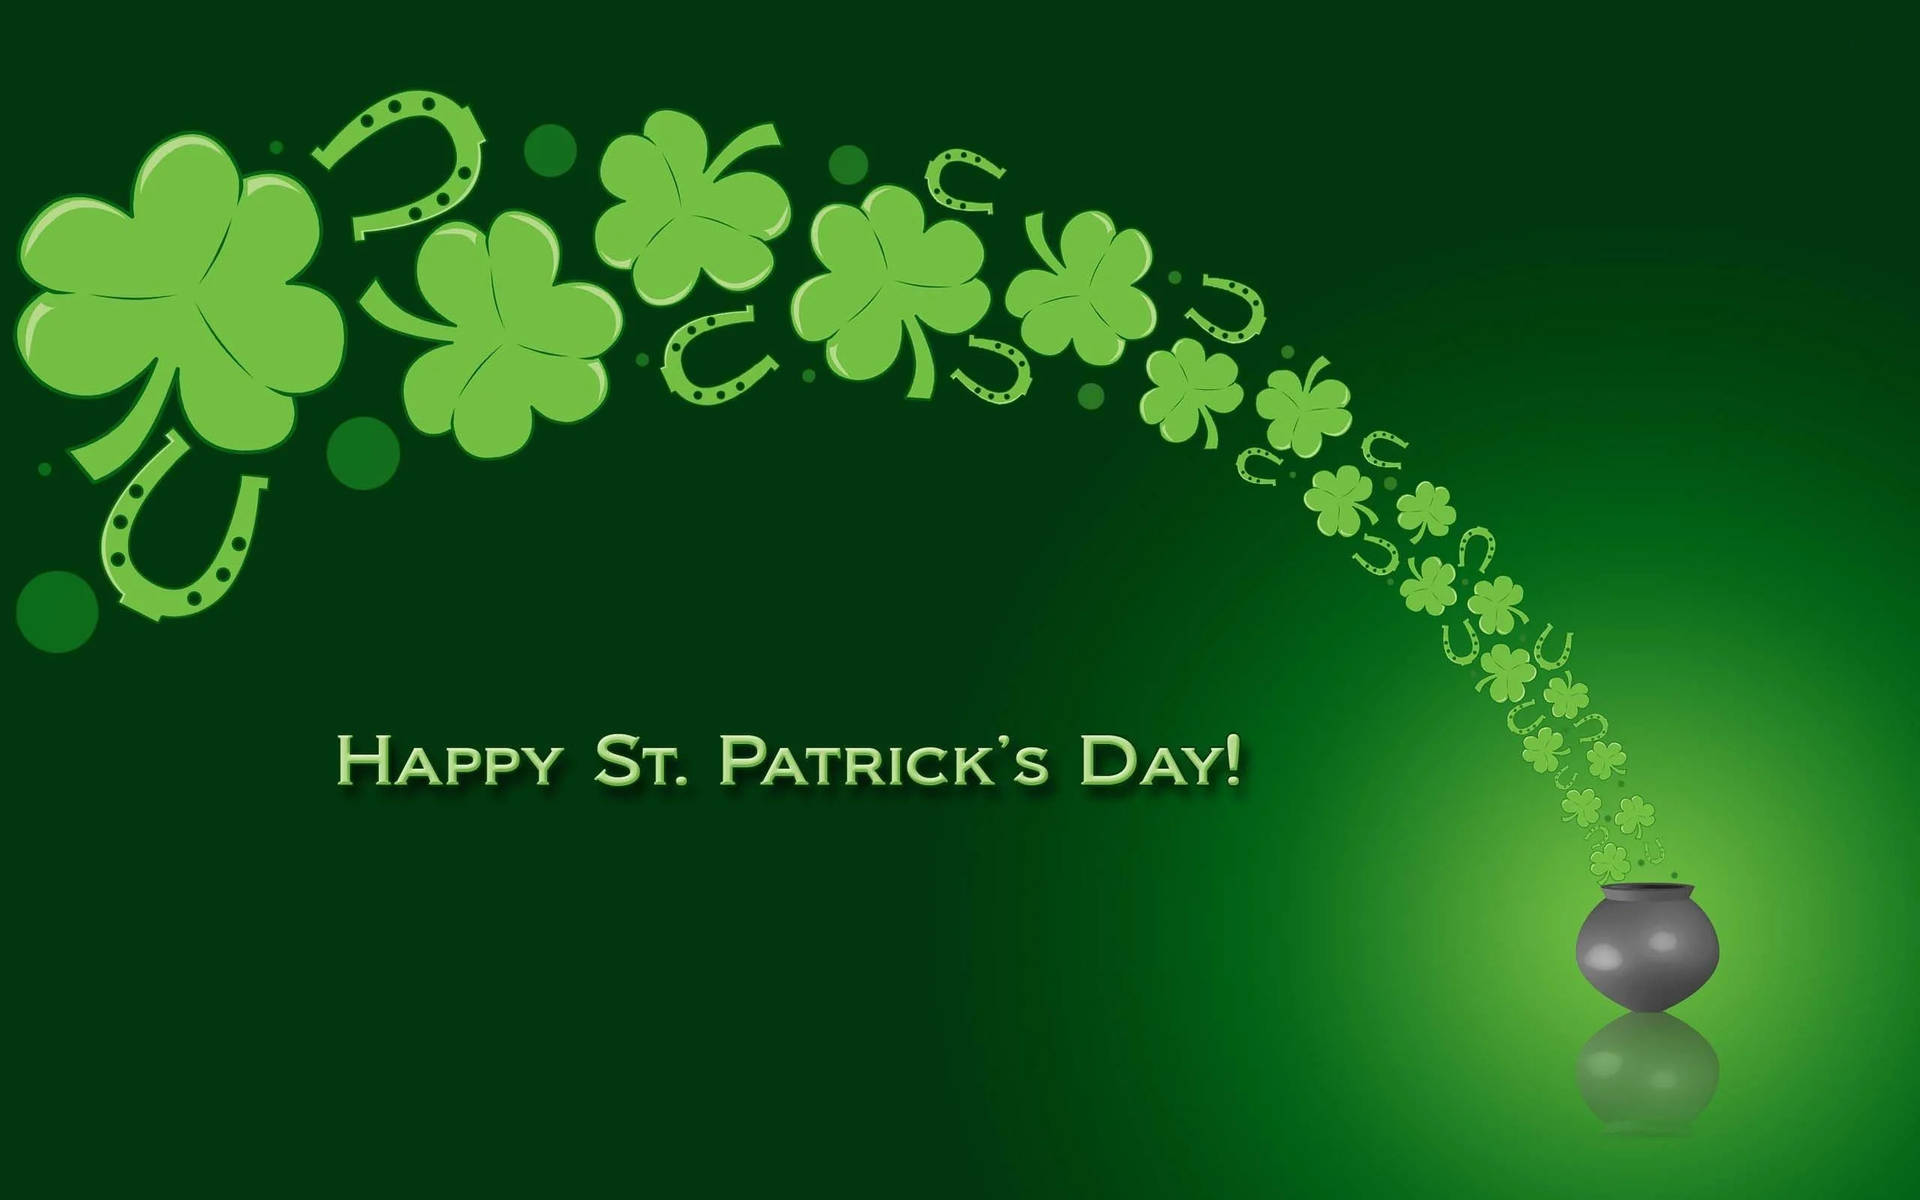 Saint Patrick’s Day With Pot Of Clovers Background